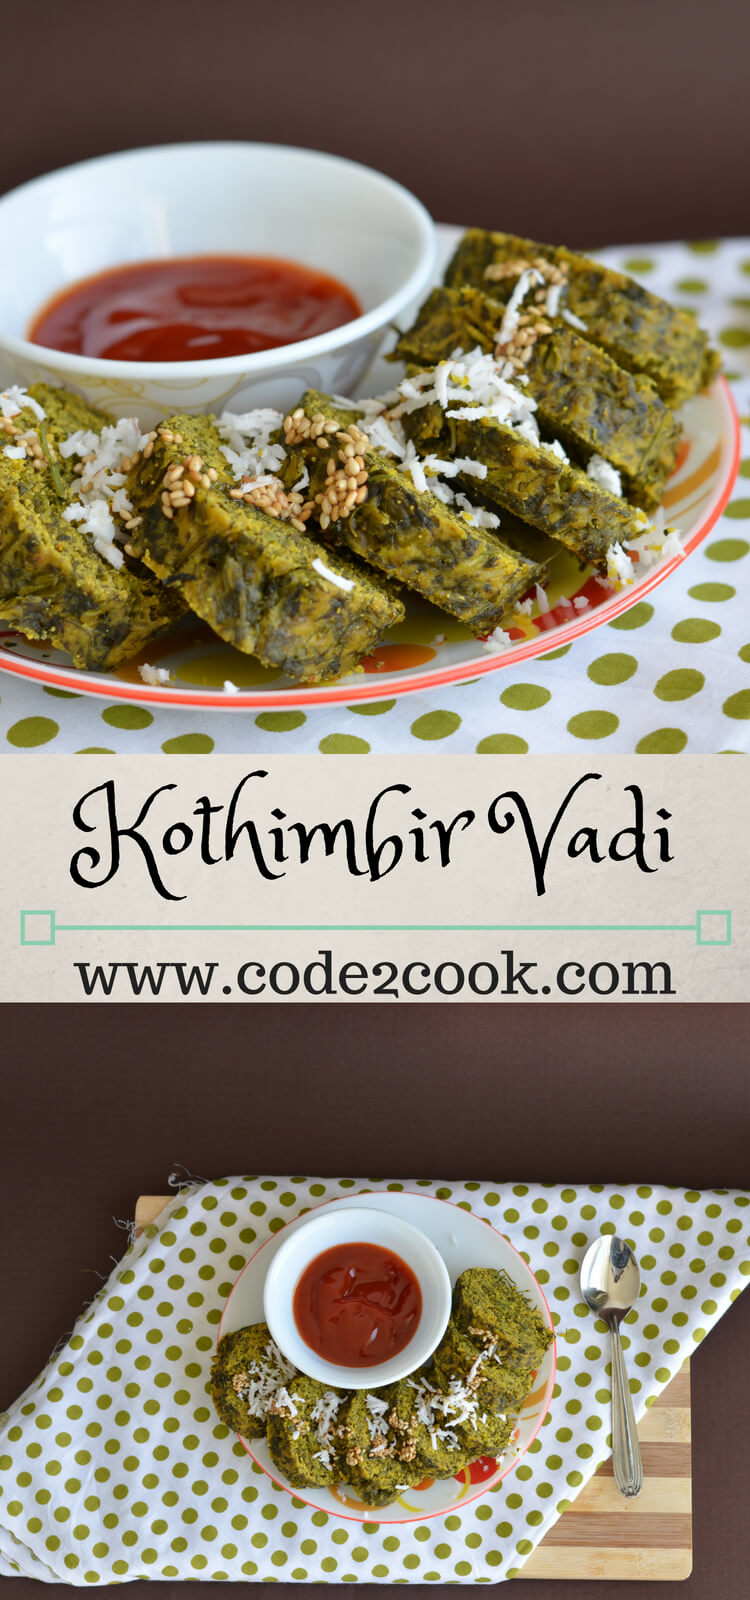 Kothimbir Vadi is a popular Maharashtrian snack which is steamed and pan-fried. It is made with fresh coriander leaves, chickpea flour, spiced up using ginger, garlic, green chili, garam masala. Kothimbir Vadi is a glutenfree snack, you can have it in breakfast or a side dish in the Maharashtrian thali.